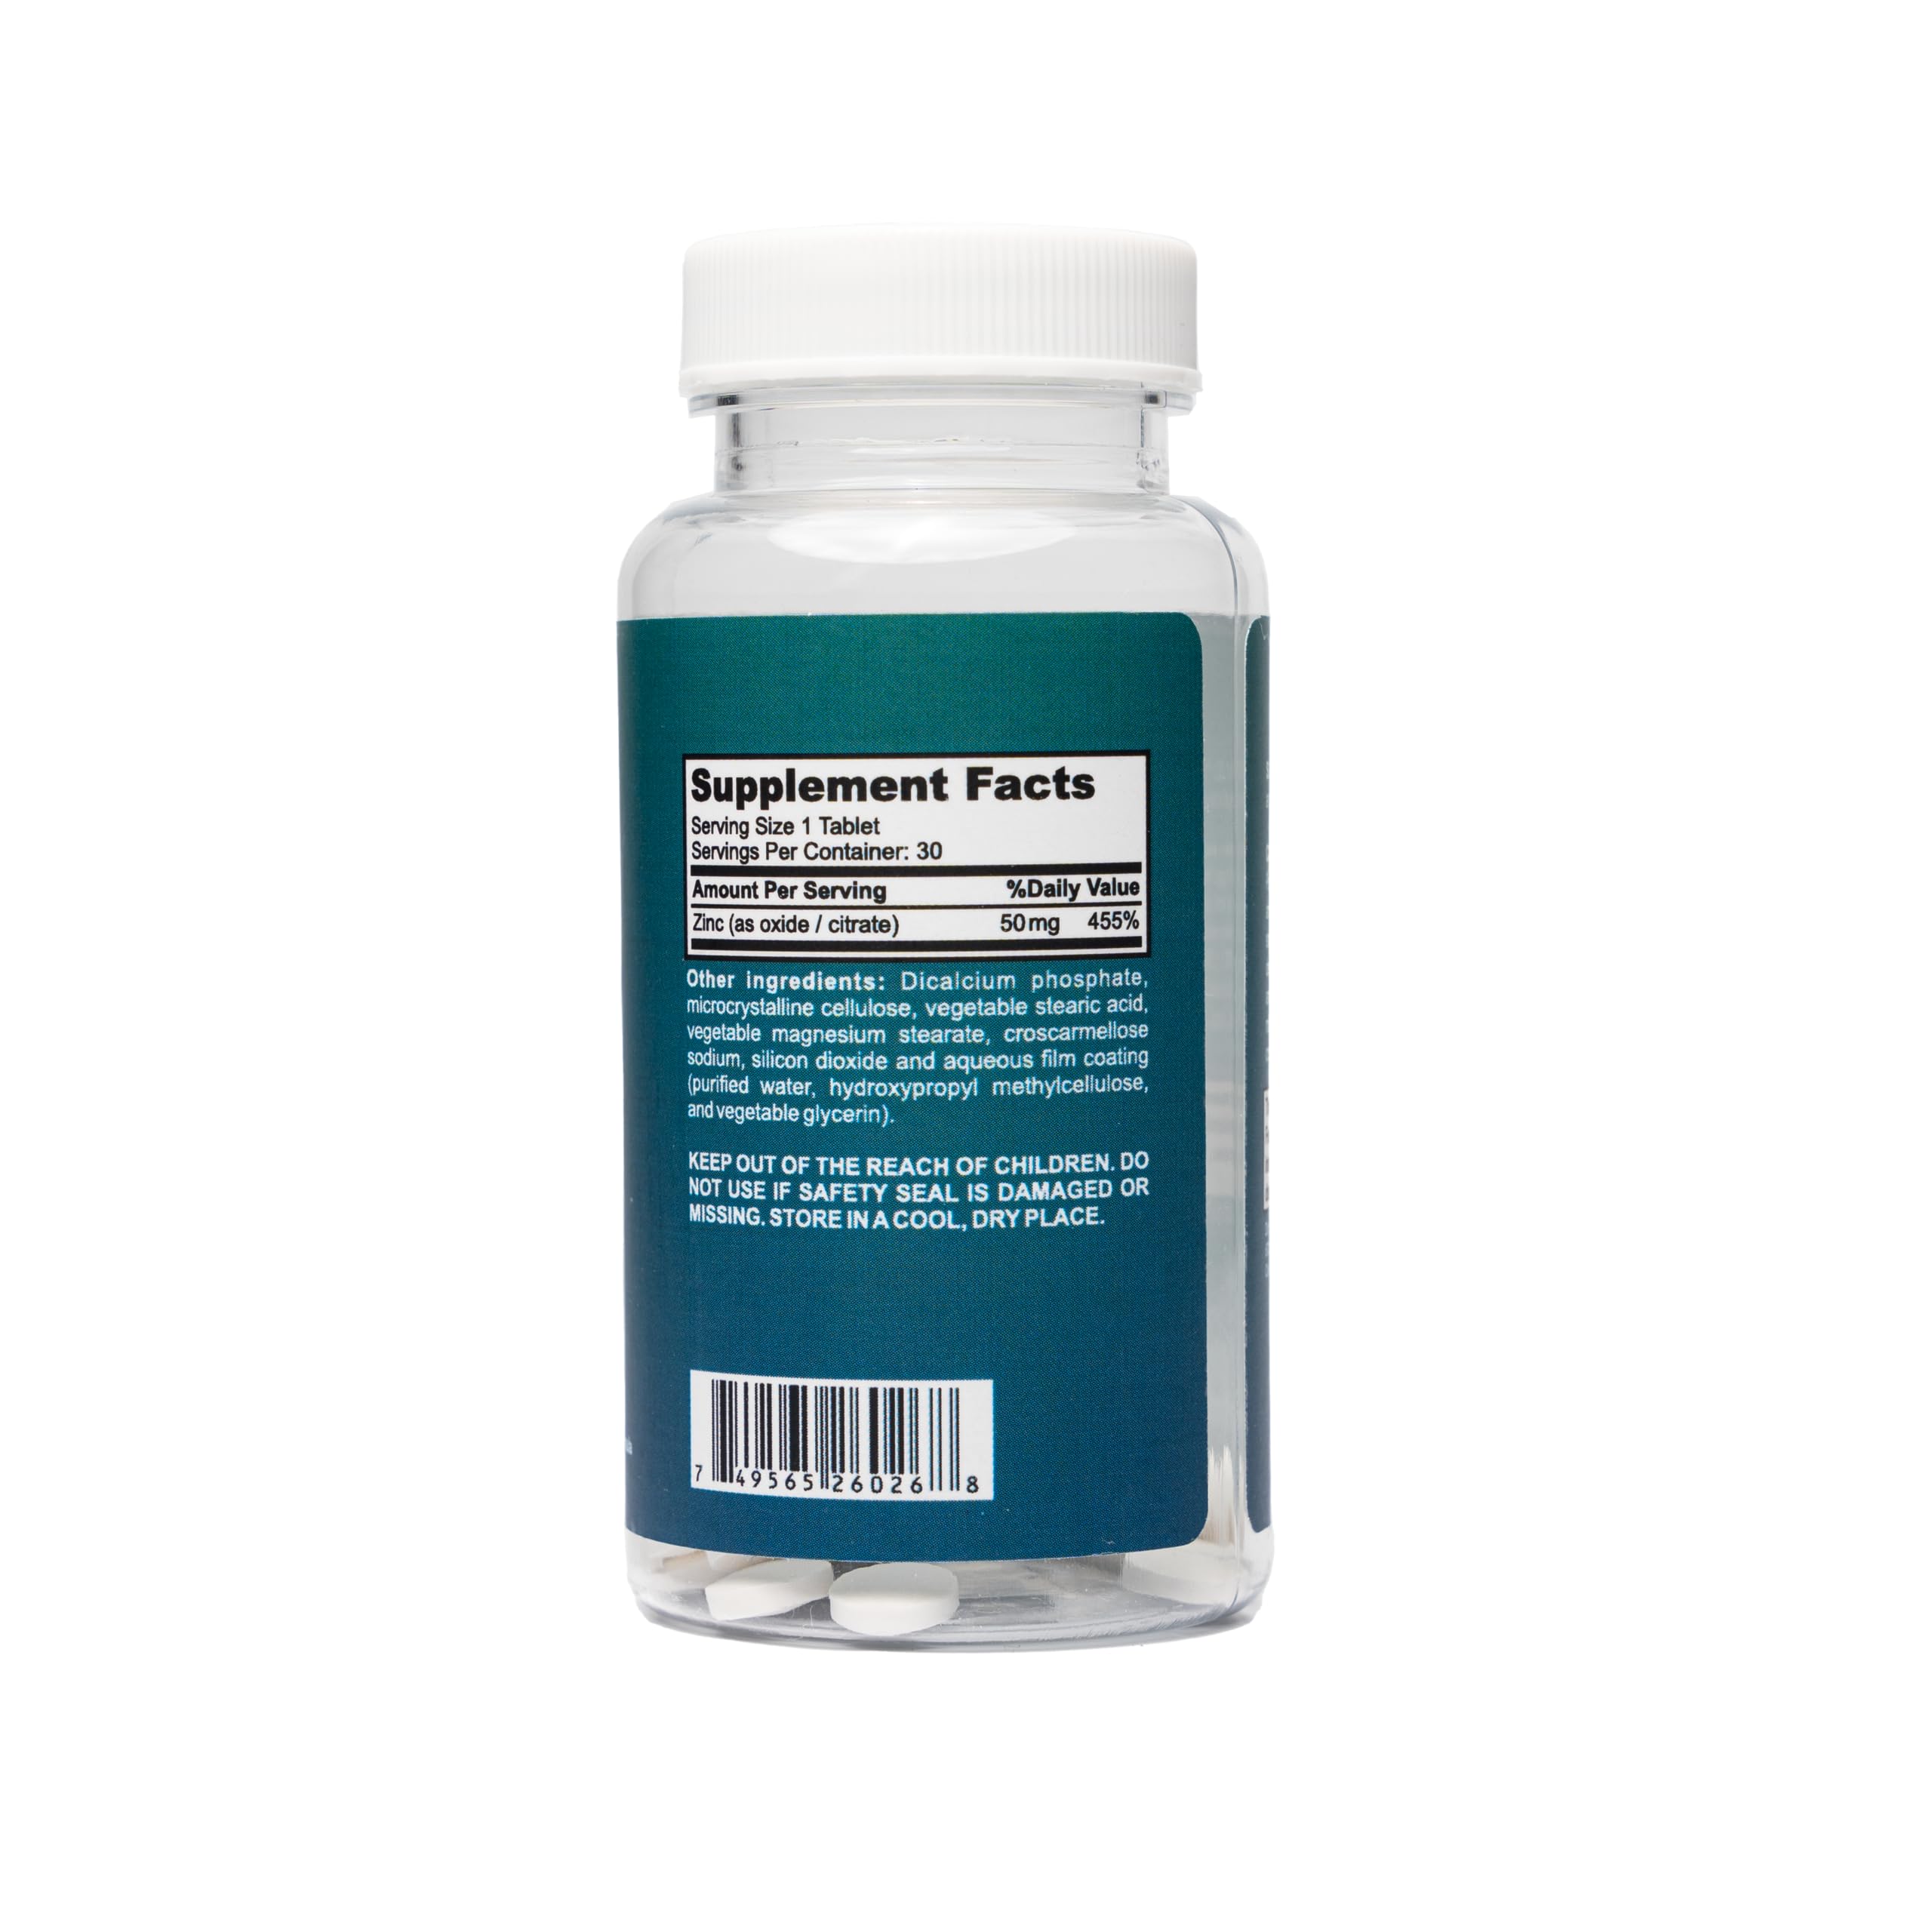 Nutradora Total Wellness Combo: Saw Palmetto Extract & Zinc Supplement for Hair, Skin, Prostate, and Immune Health